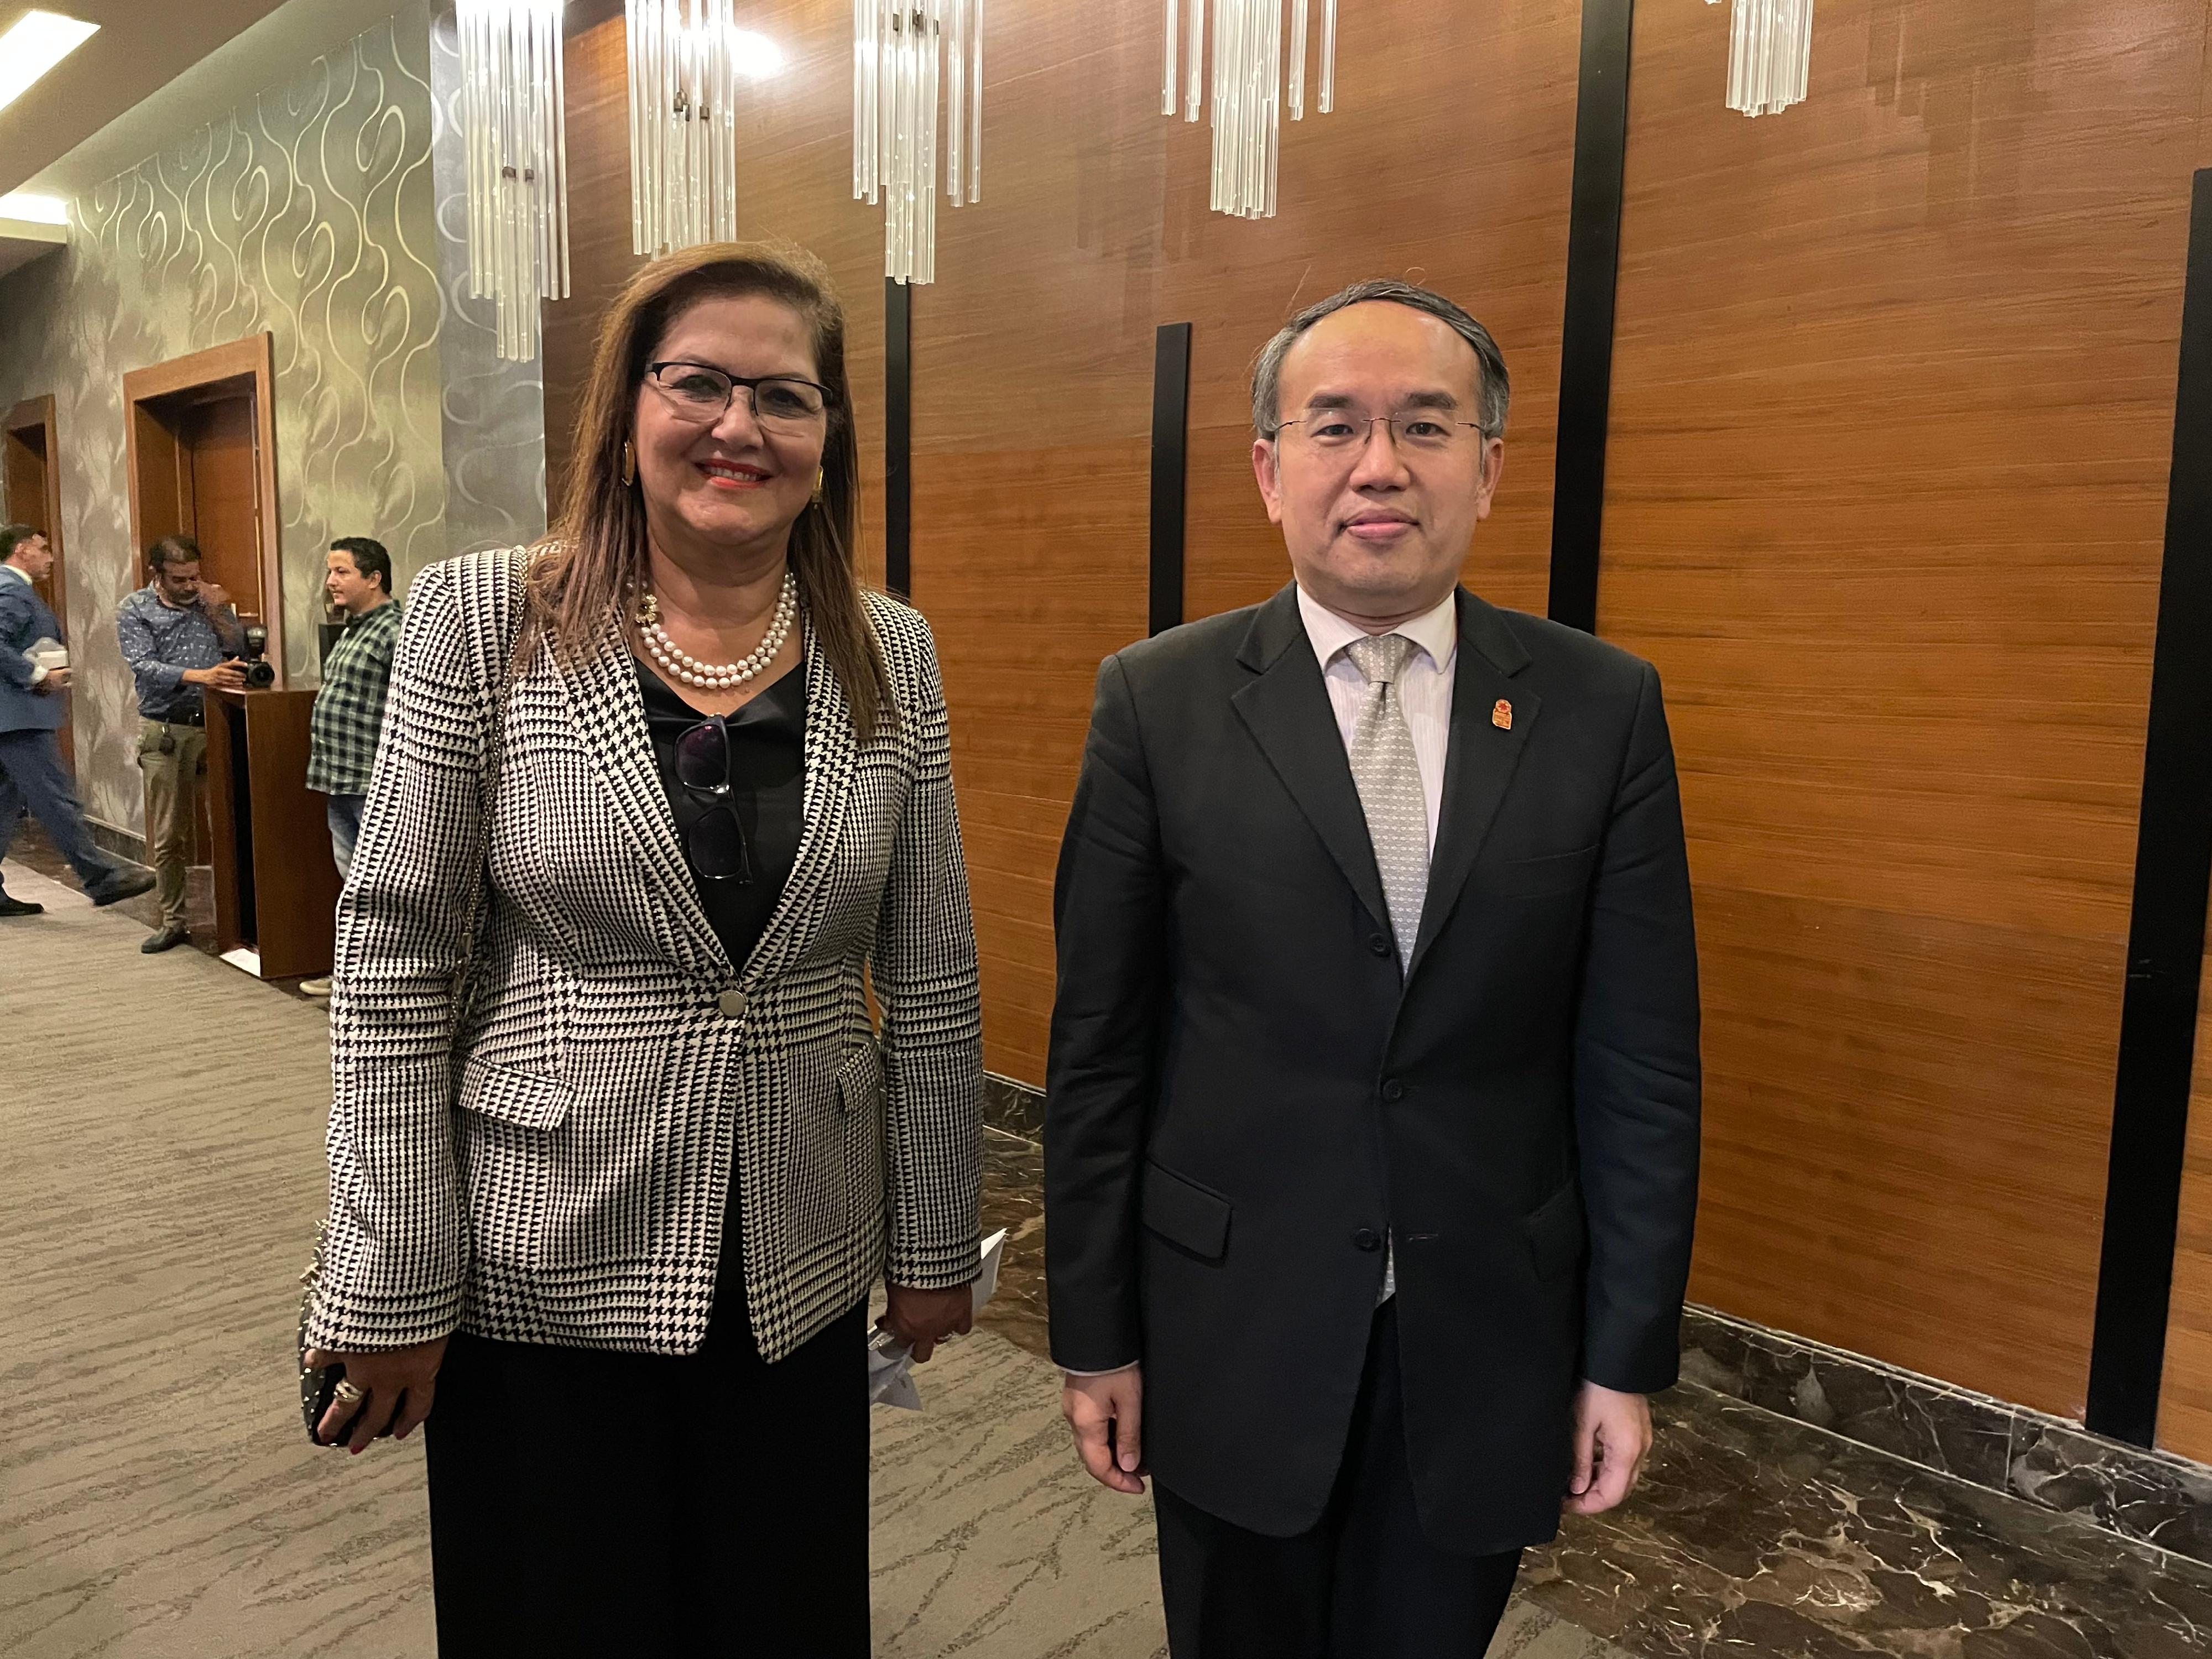 The Secretary for Financial Services and the Treasury, Mr Christopher Hui, continues his visit in Egypt. Photos shows Mr Hui (right) meeting with the Minister of Planning and Economic Development of Egypt, Dr Hala H Elsaid (left), in Sharm El Sheikh yesterday (September 24, Sharm El Sheikh time).